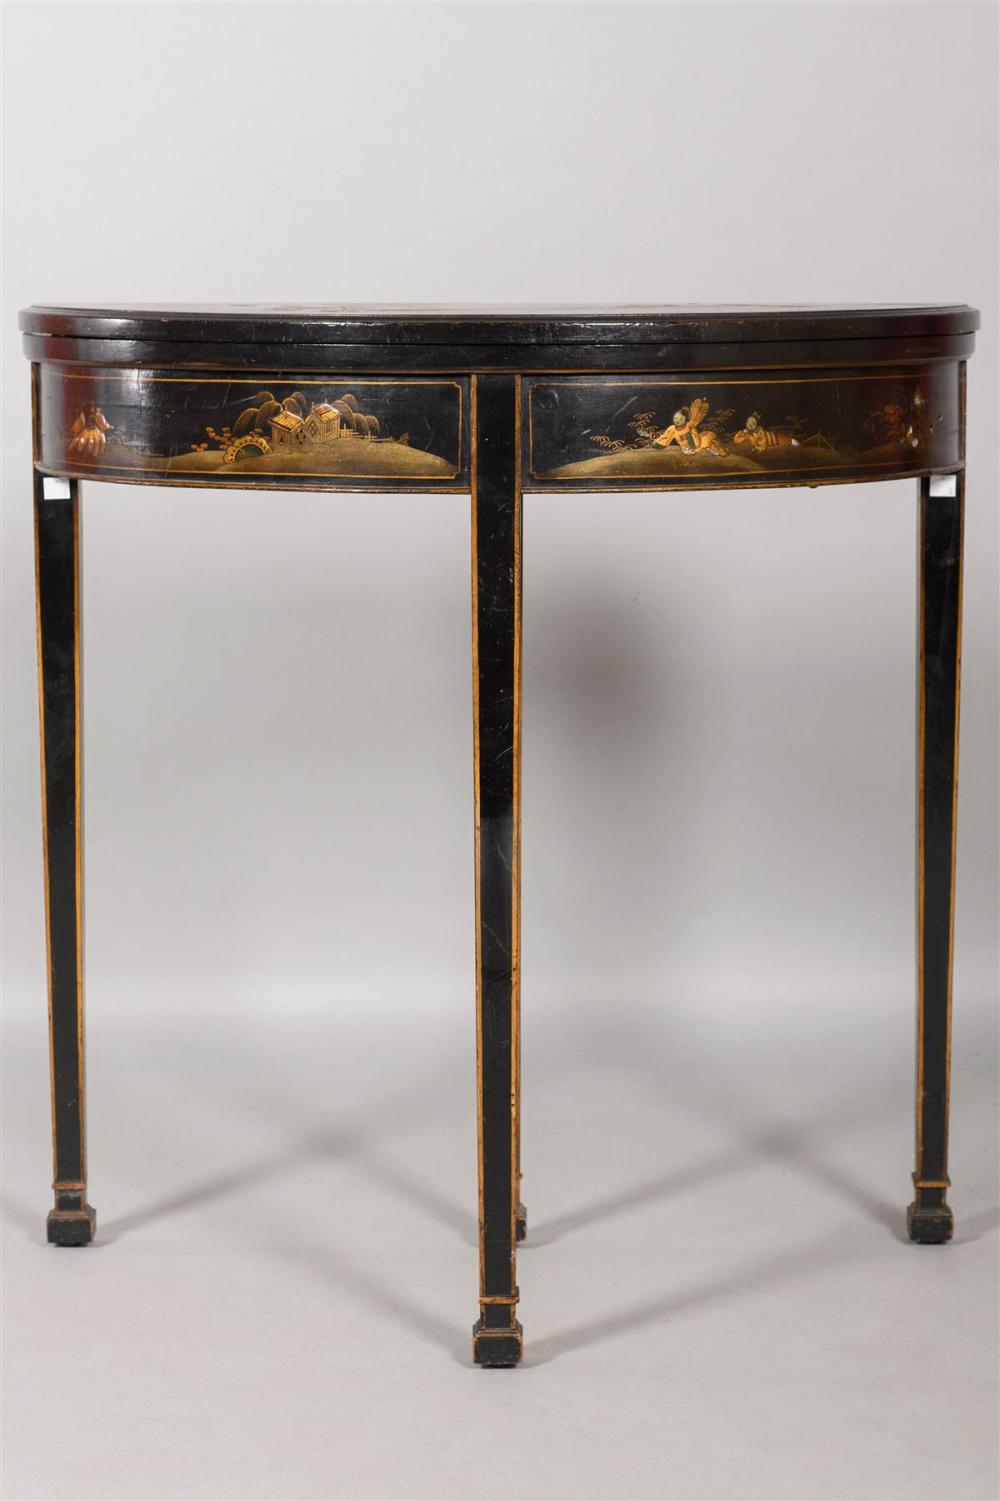 GEORGE III STYLE CHINOISERIE DECORATED 33adec